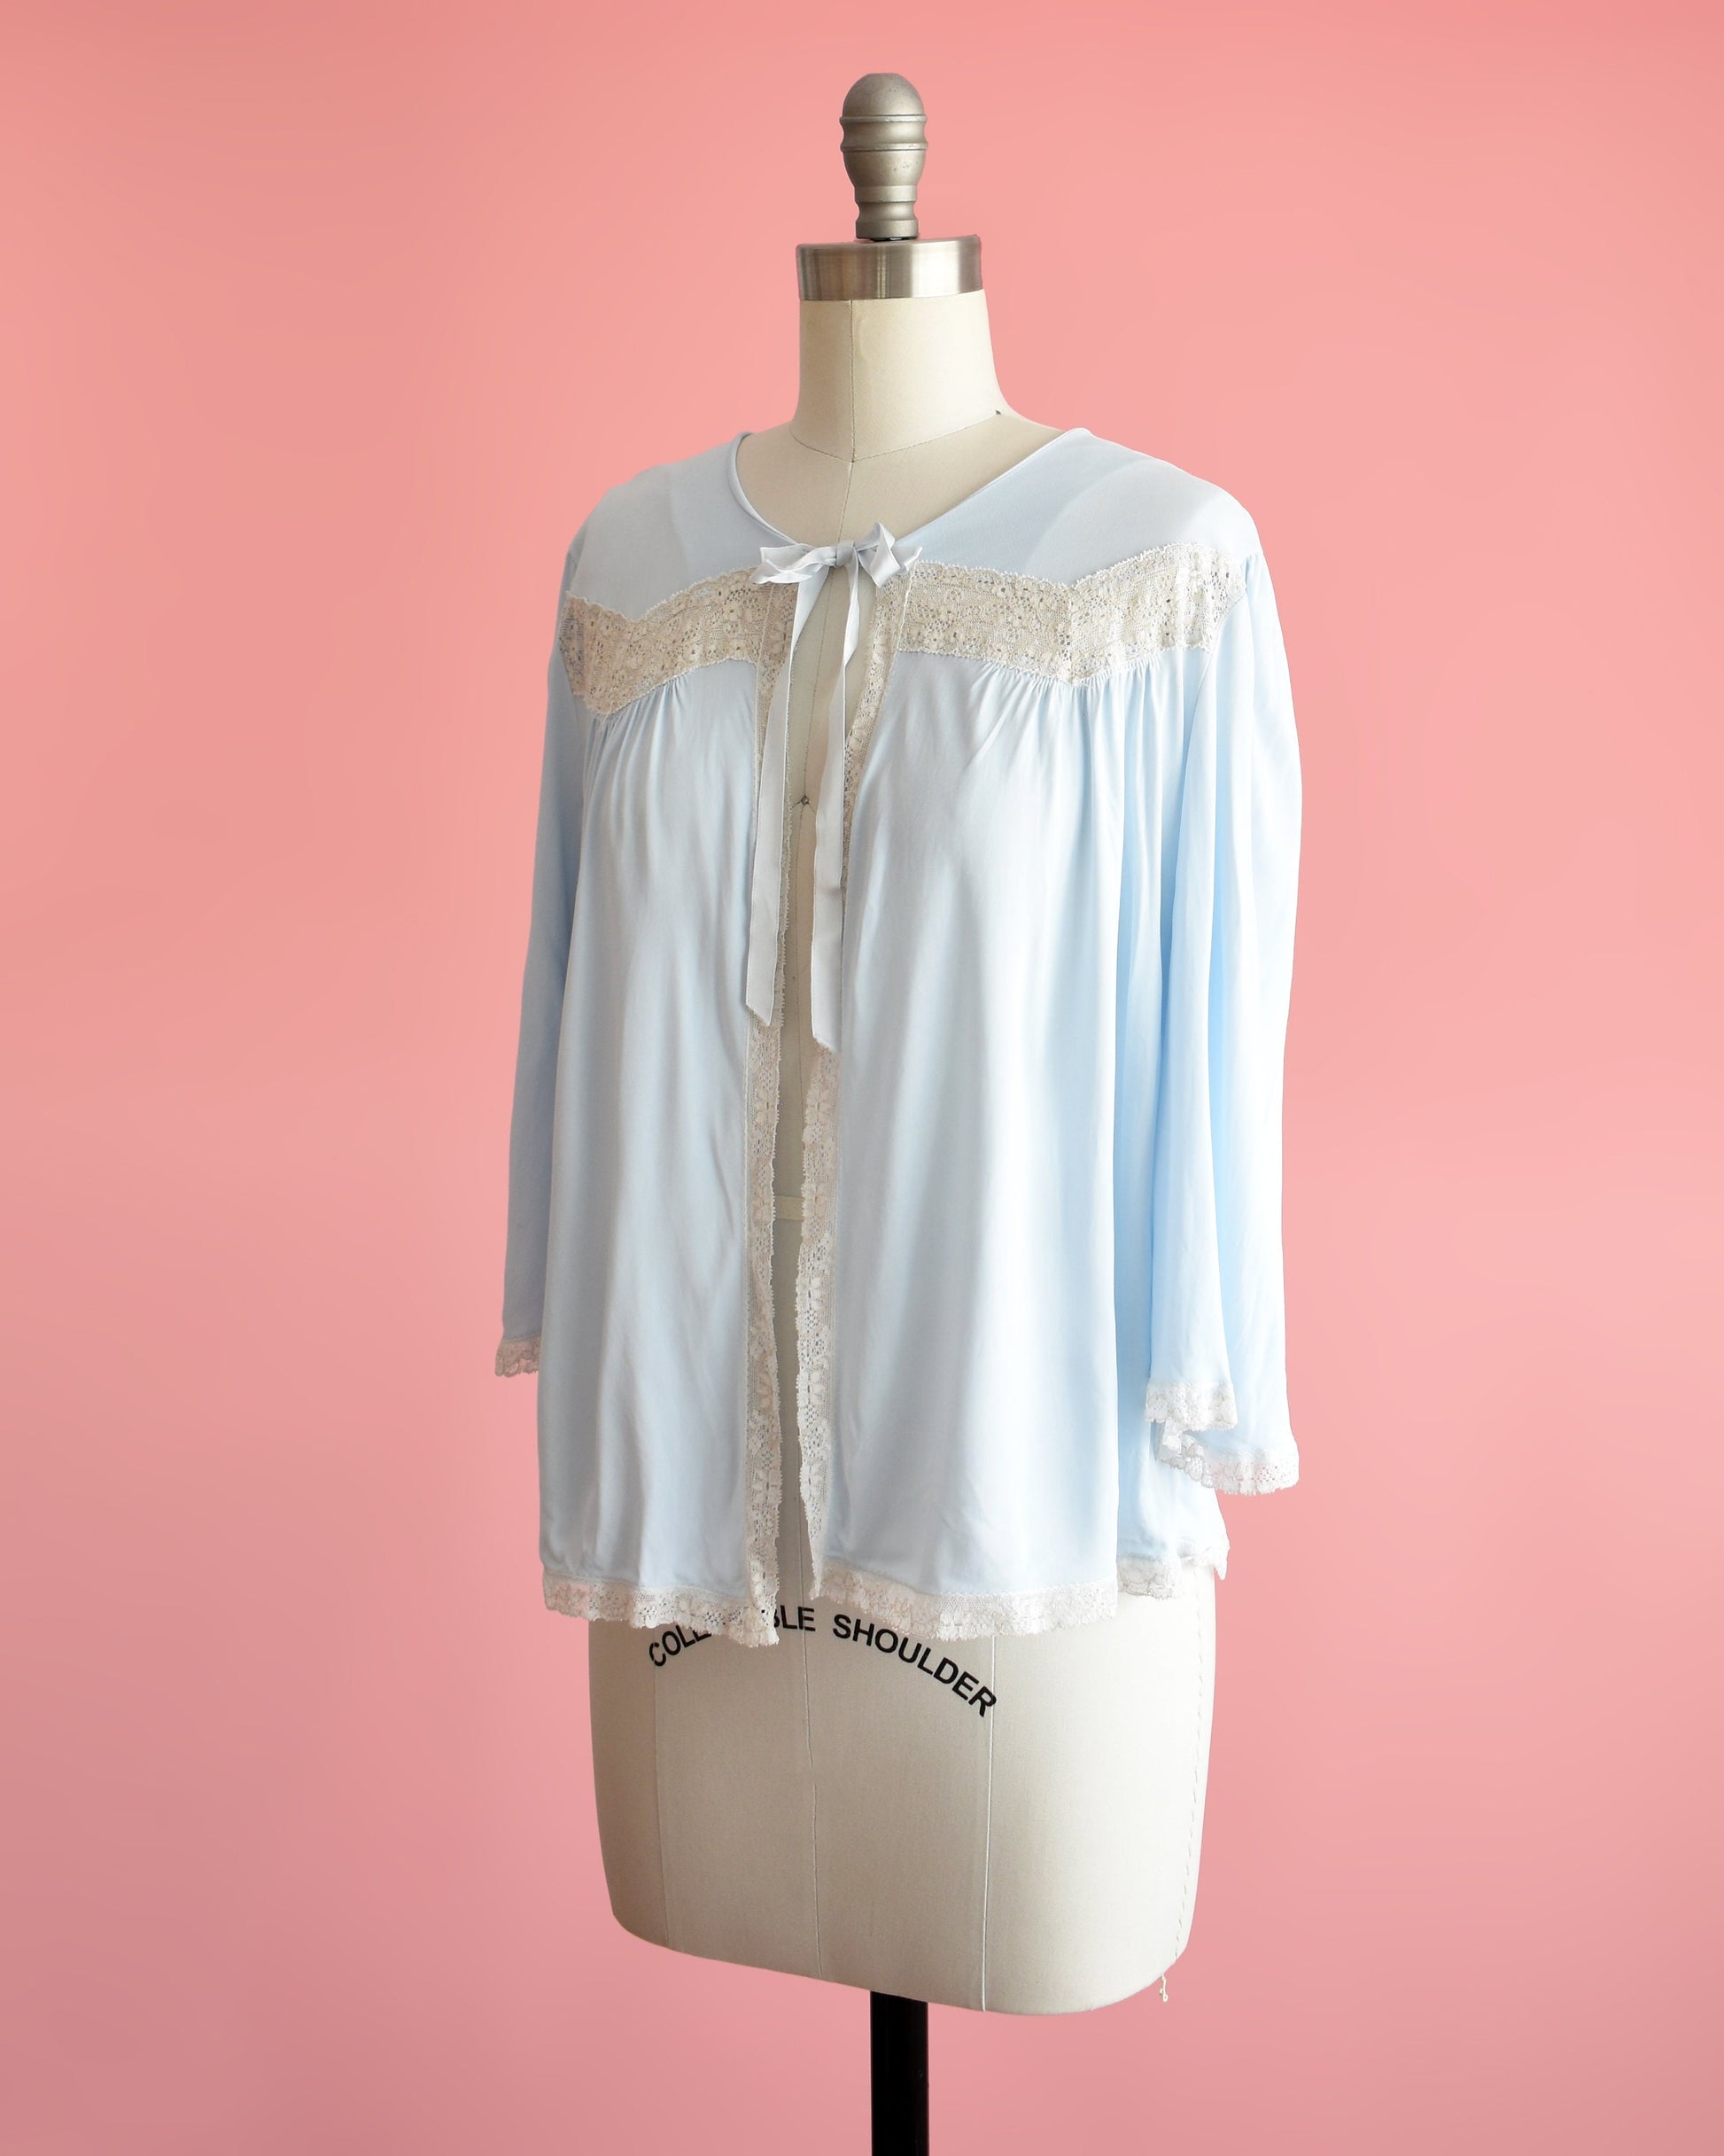 Side front view of a vintage 60s light blue bed jacket with cream lace trim around the front, down the front, around the hem, and cuffs. A ribbon tie is at the center of the collar. The garment is modeled on a dress form.